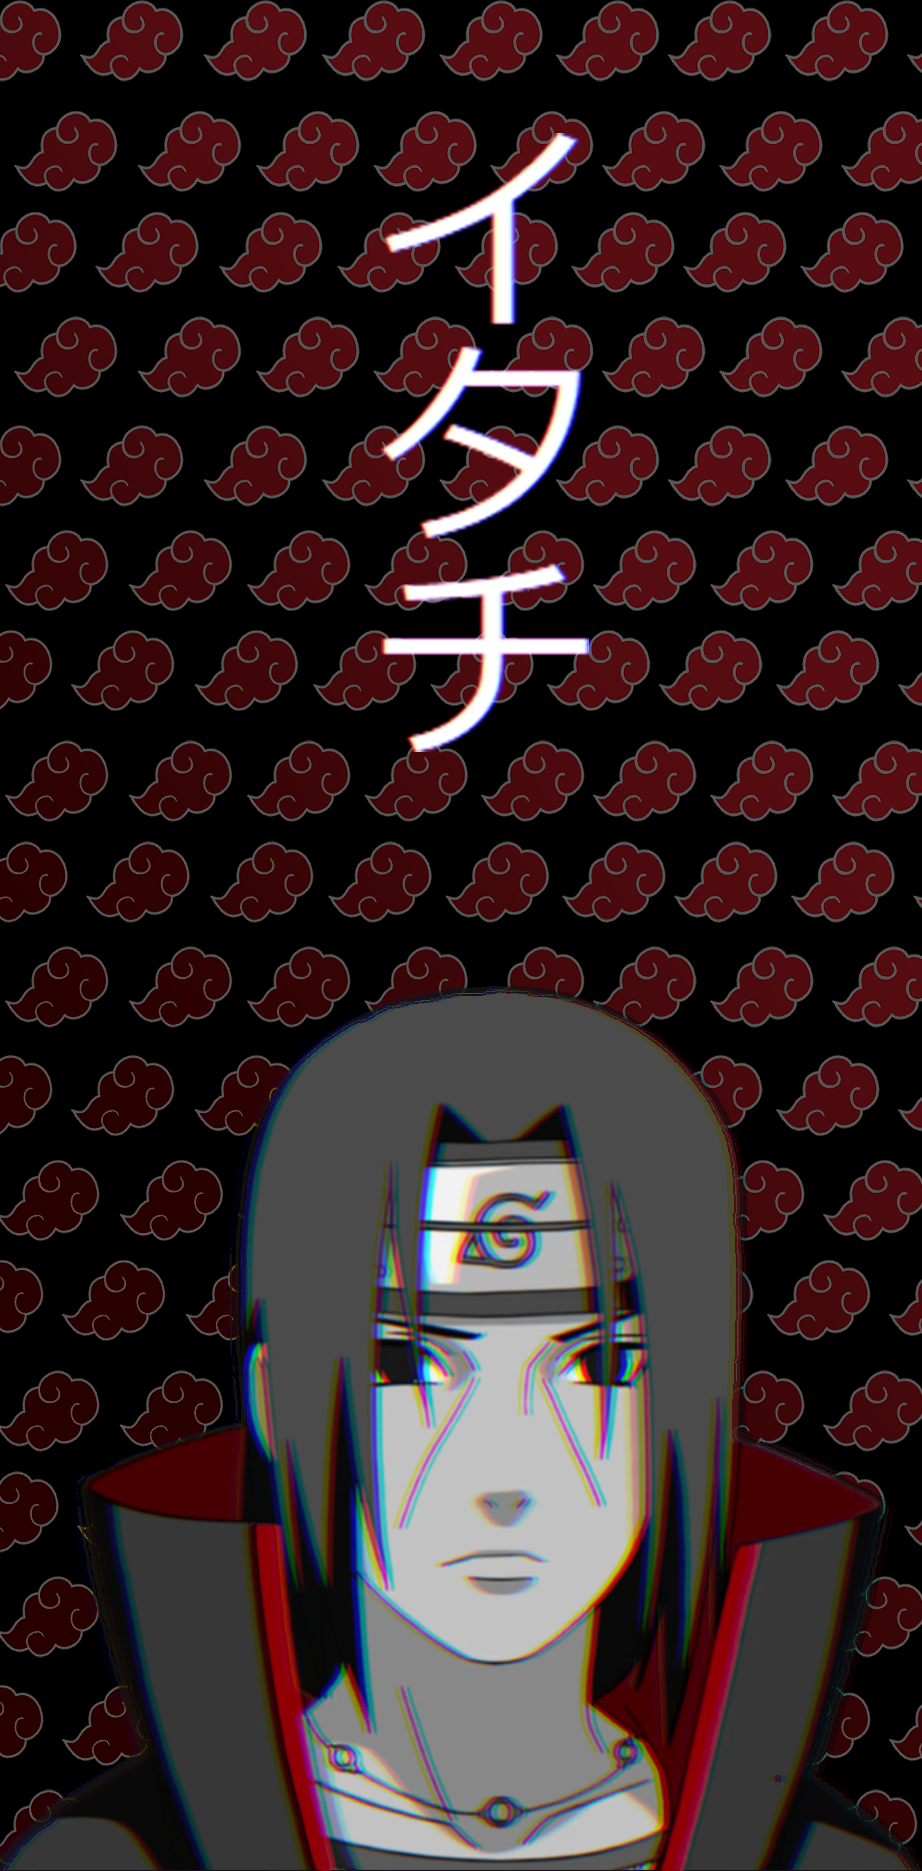 Repost of my Itachi edit that got removed